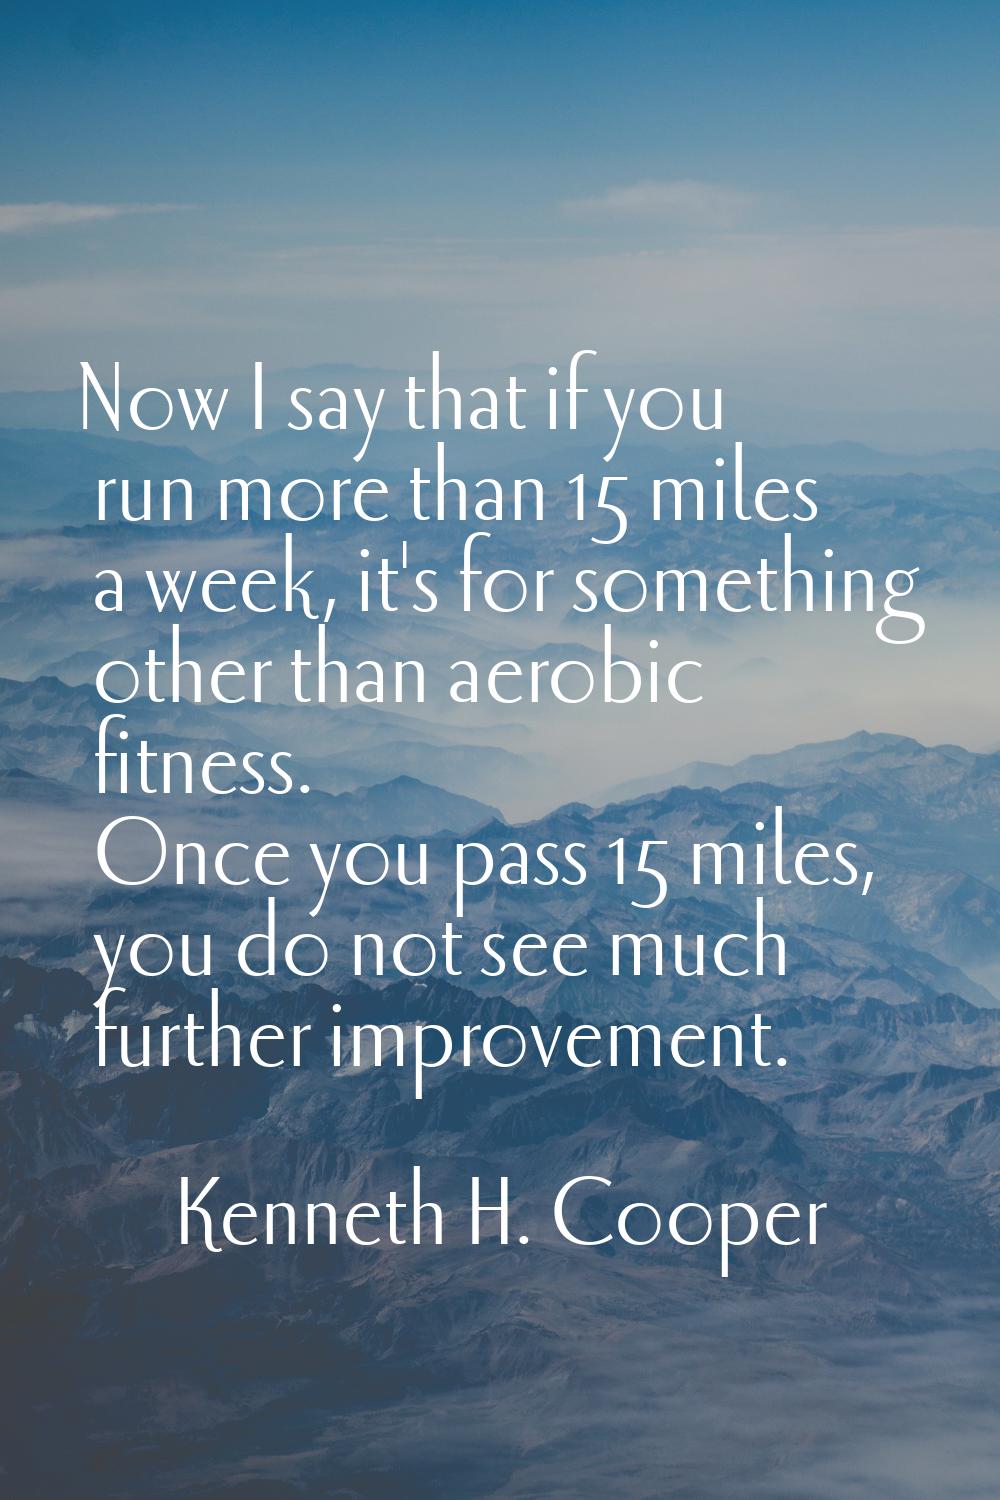 Now I say that if you run more than 15 miles a week, it's for something other than aerobic fitness.